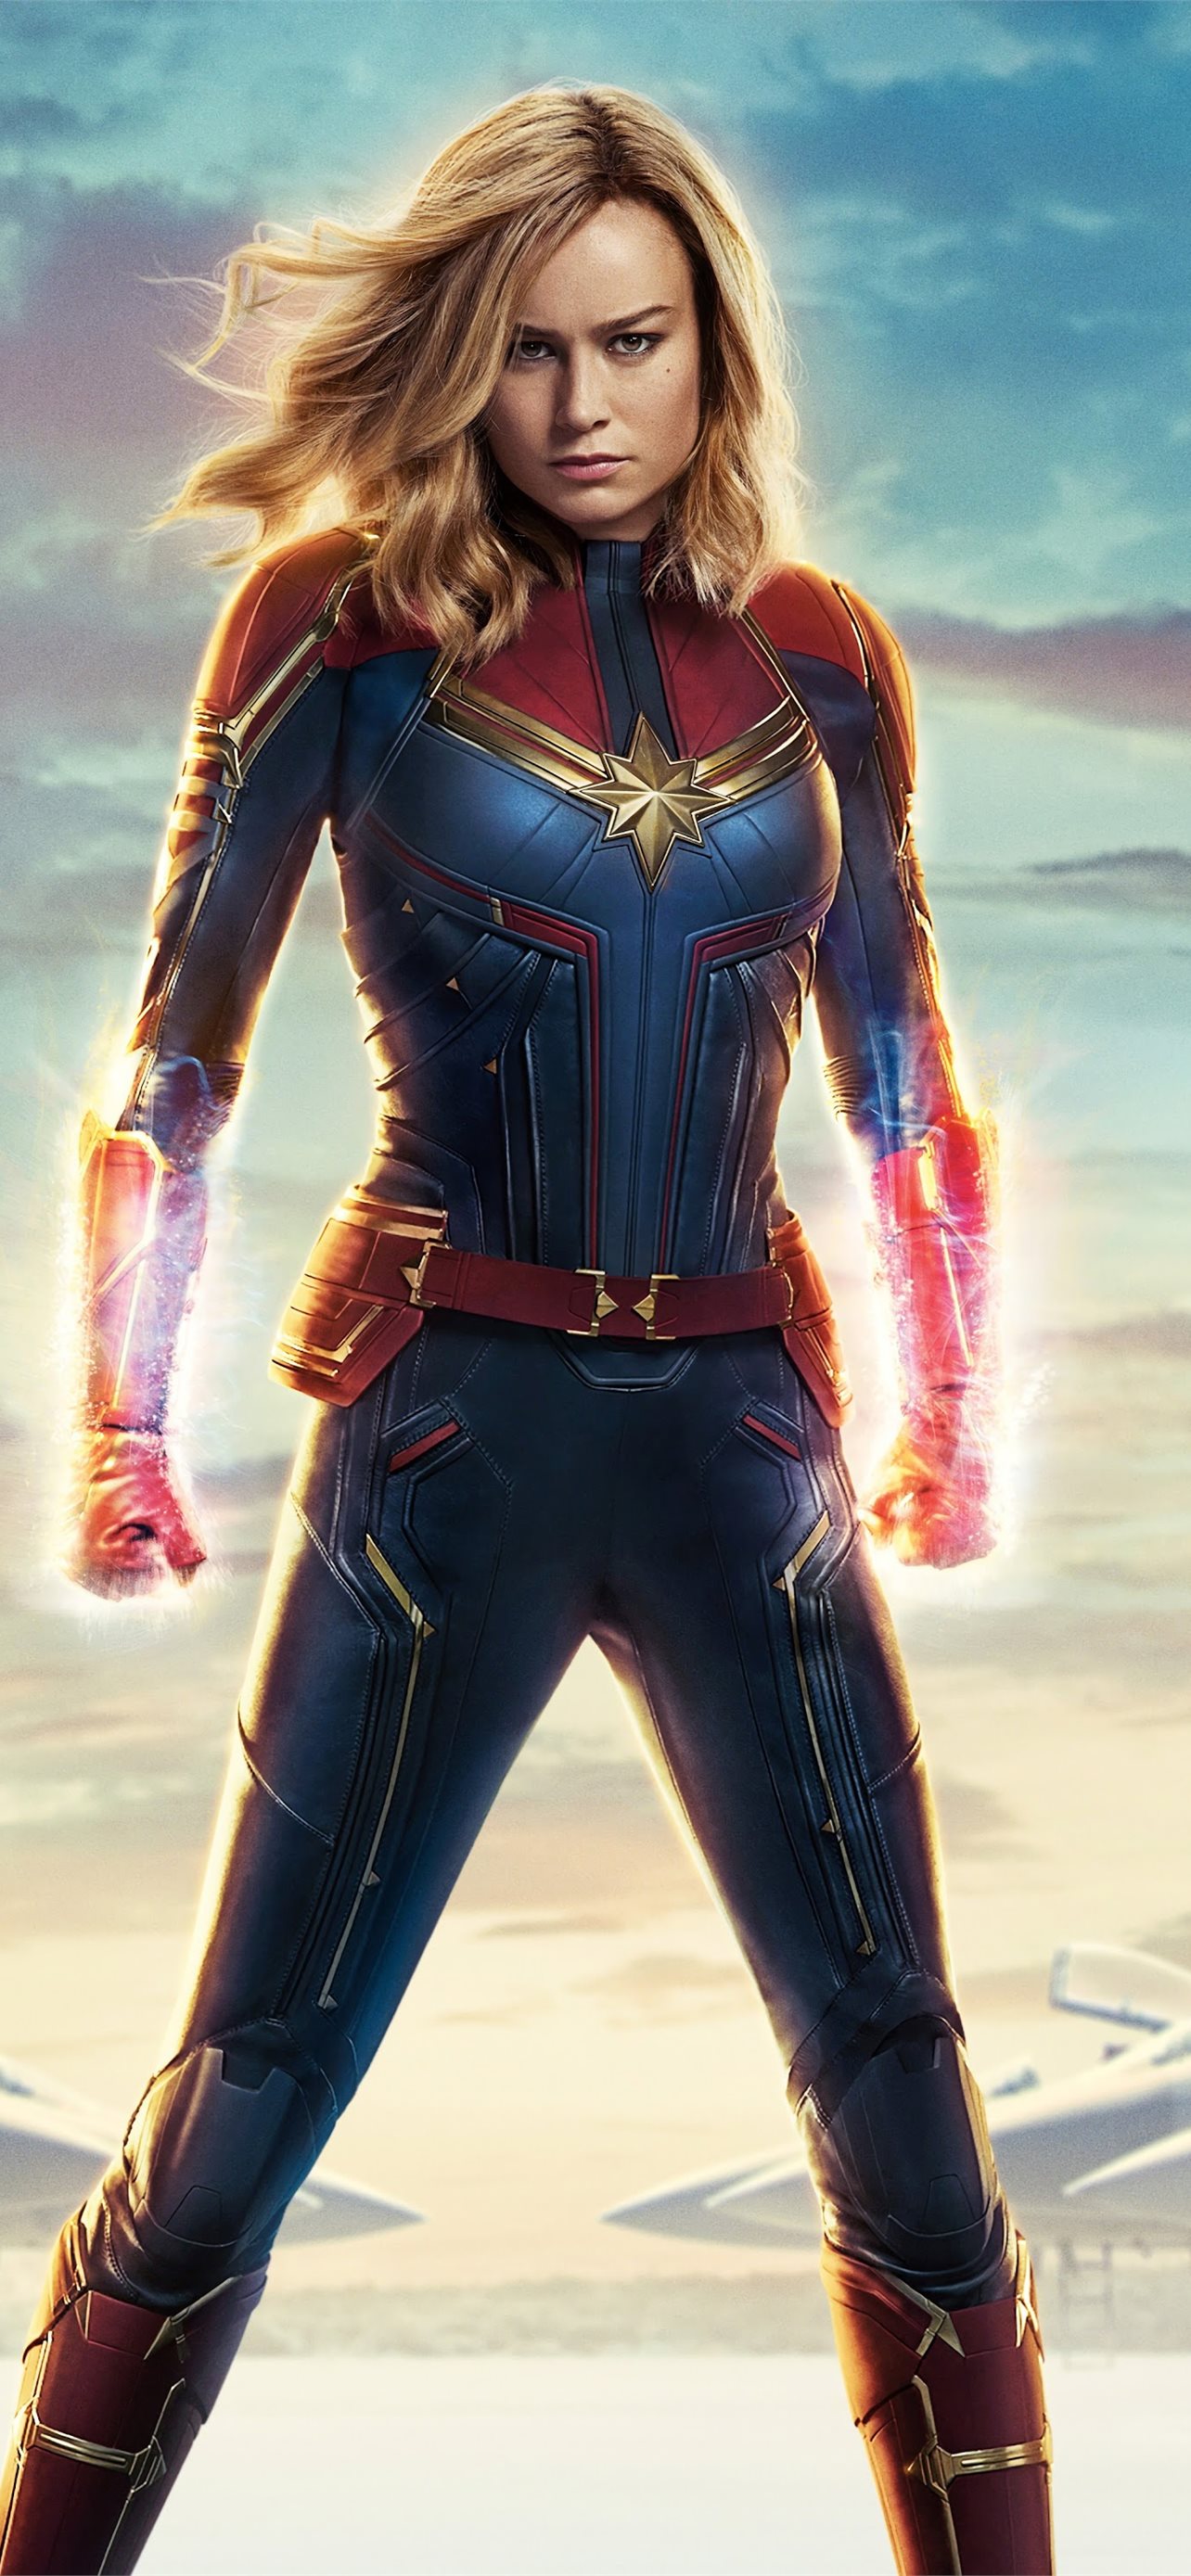 Captain Marvel Movie Brie Larson 8K iPhone Wallpapers Free Download